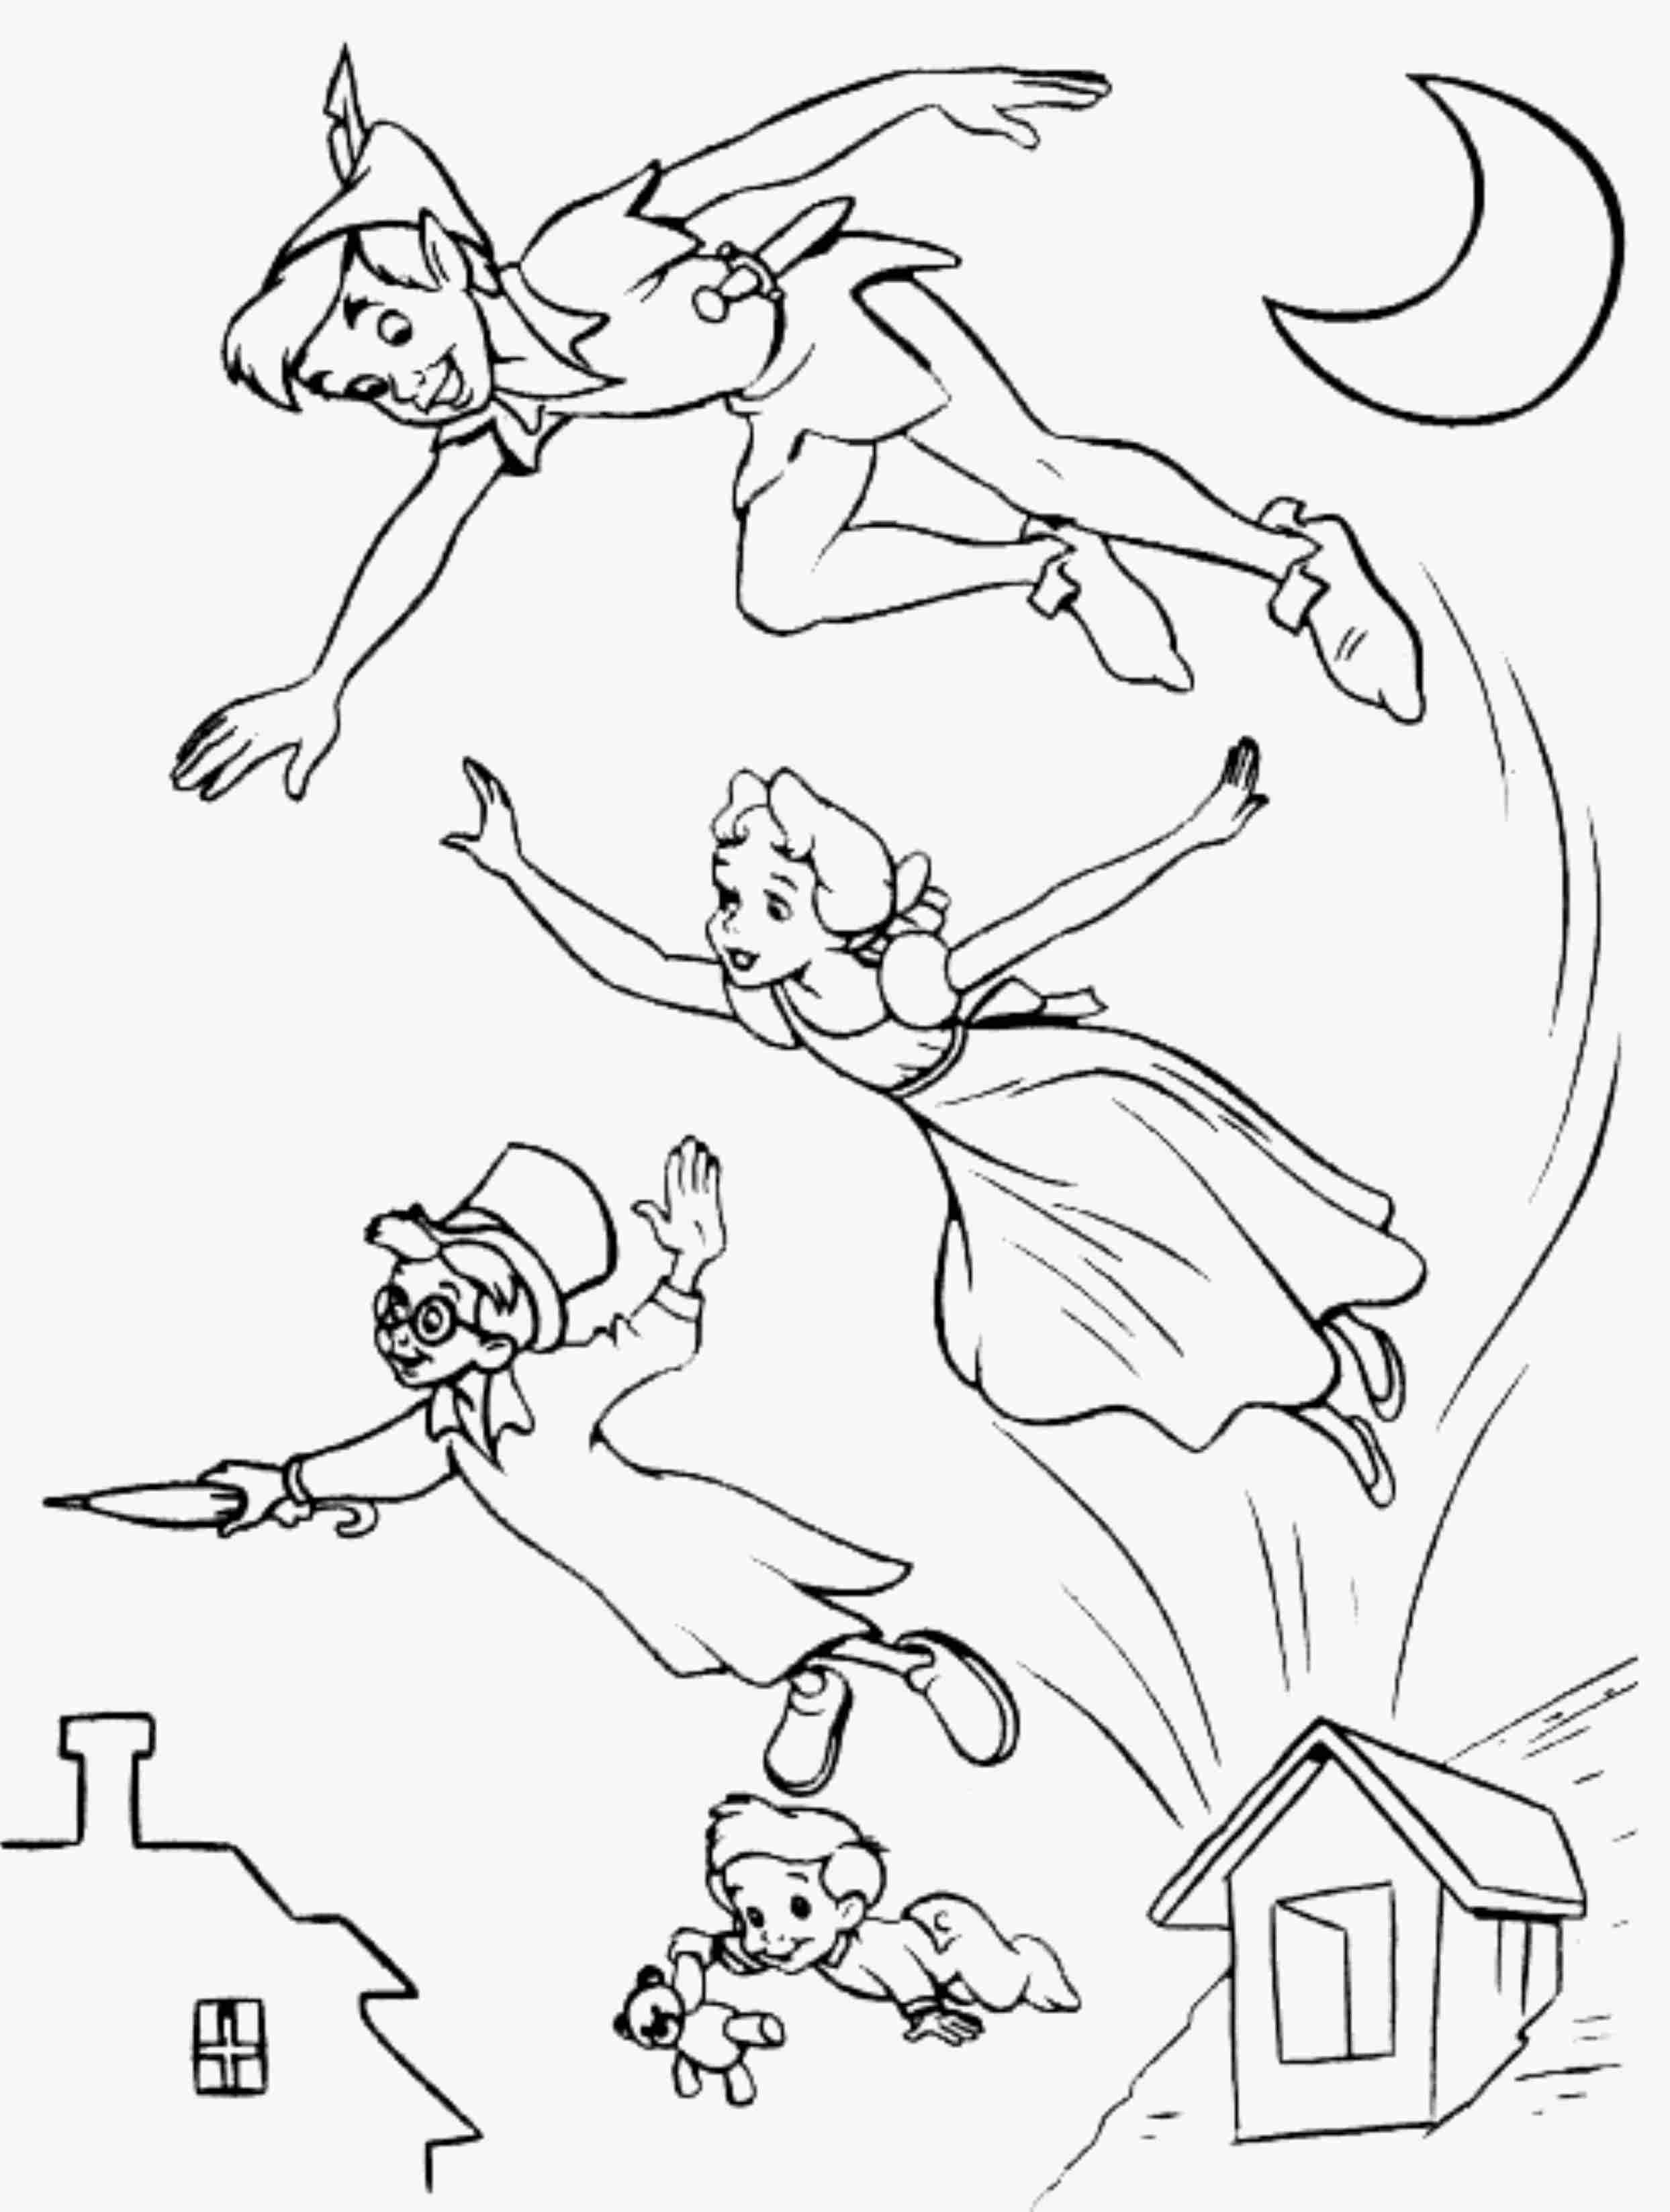 Peter Pan And Tinkerbell Coloring Pages at GetColorings.com | Free